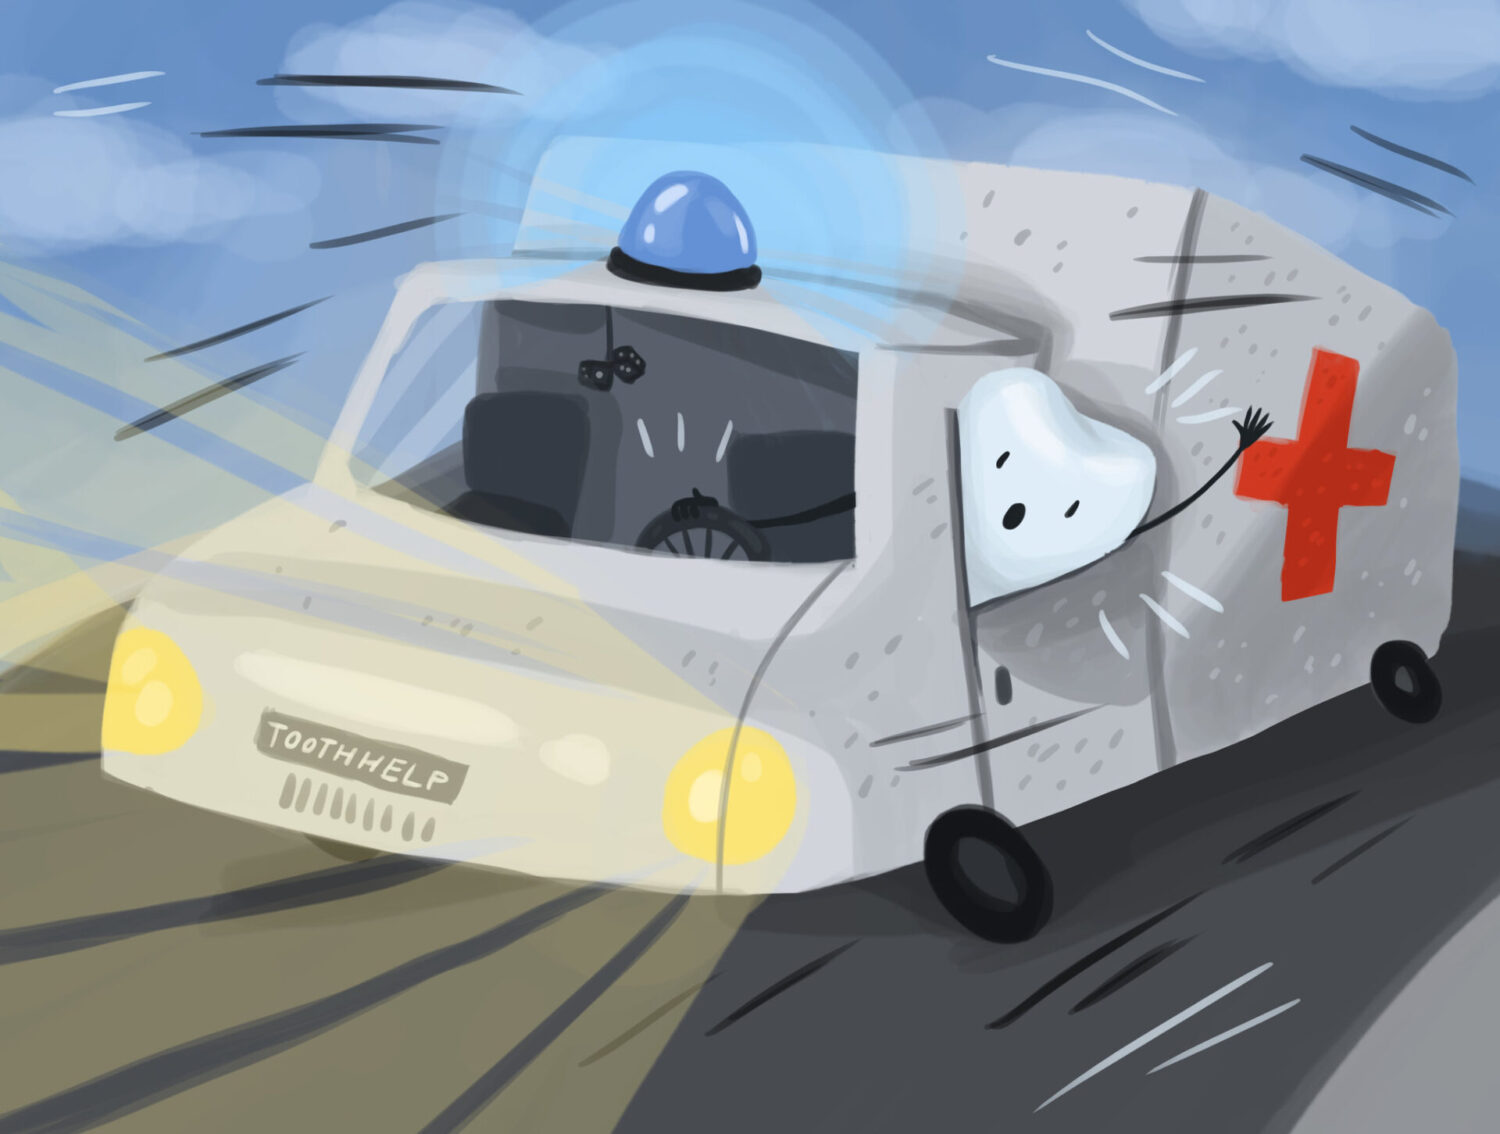 Illustration of a tooth driving an ambulance to represent a dental emergency